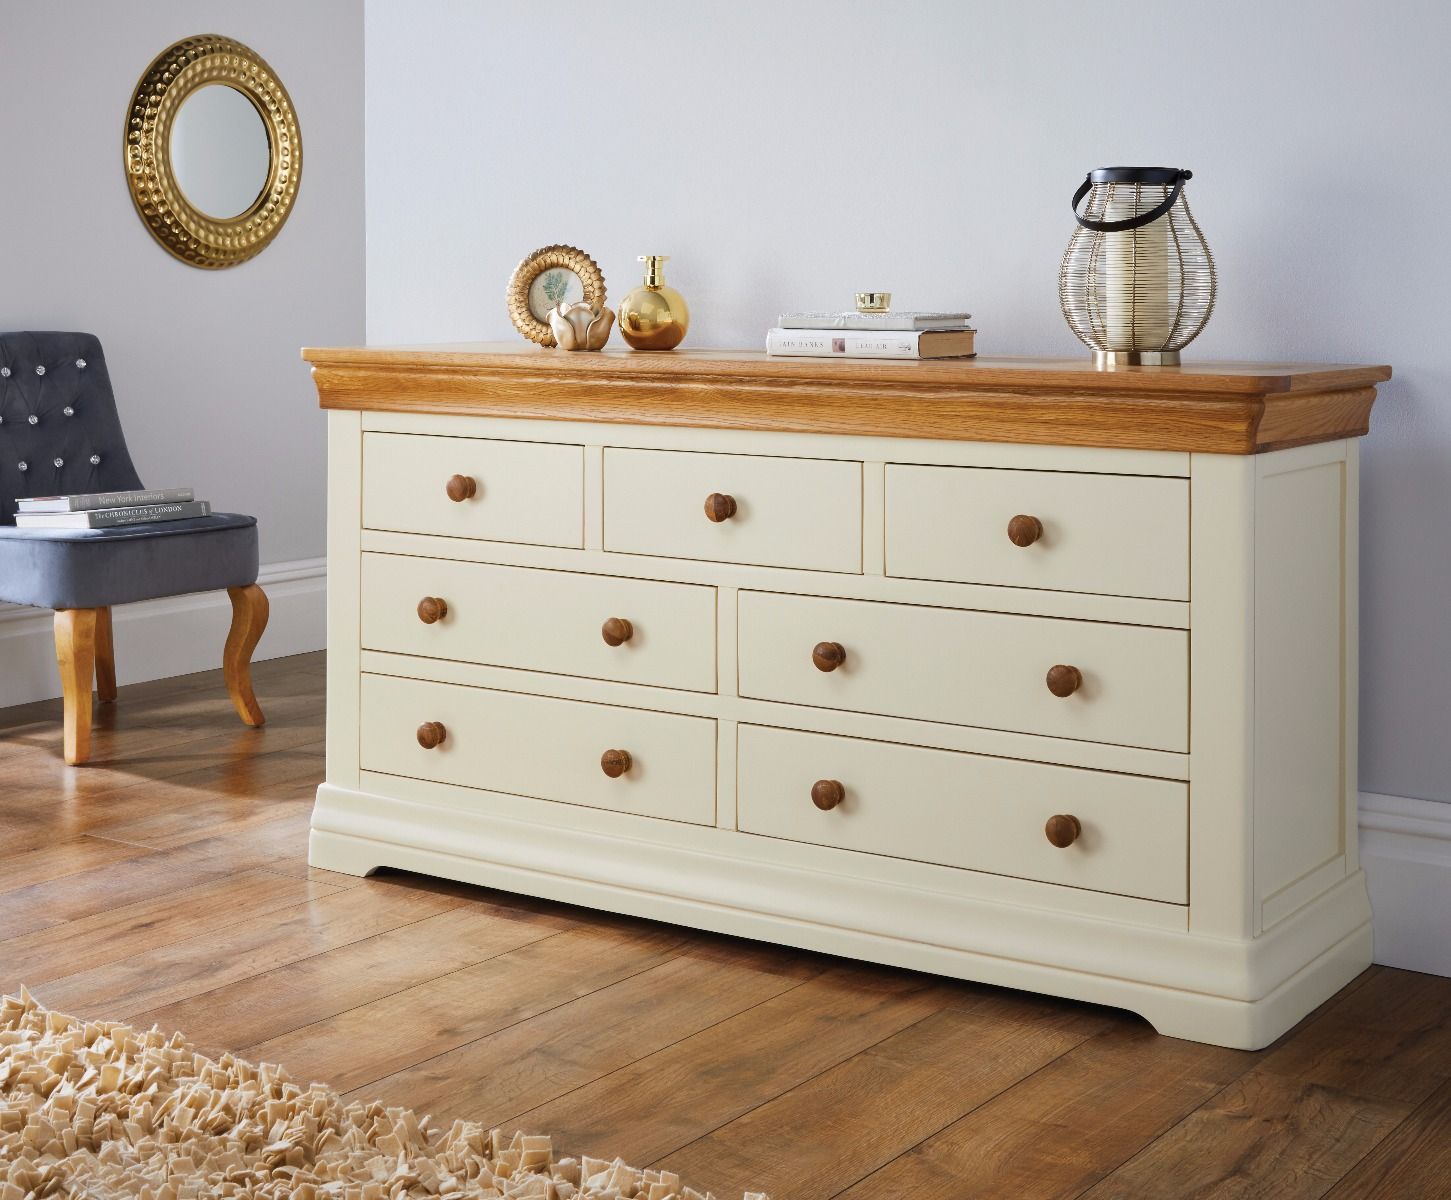 Farmhouse Country Oak Cream Painted 3 Over 4 Chest of Drawers - 10% OFF WINTER SALE